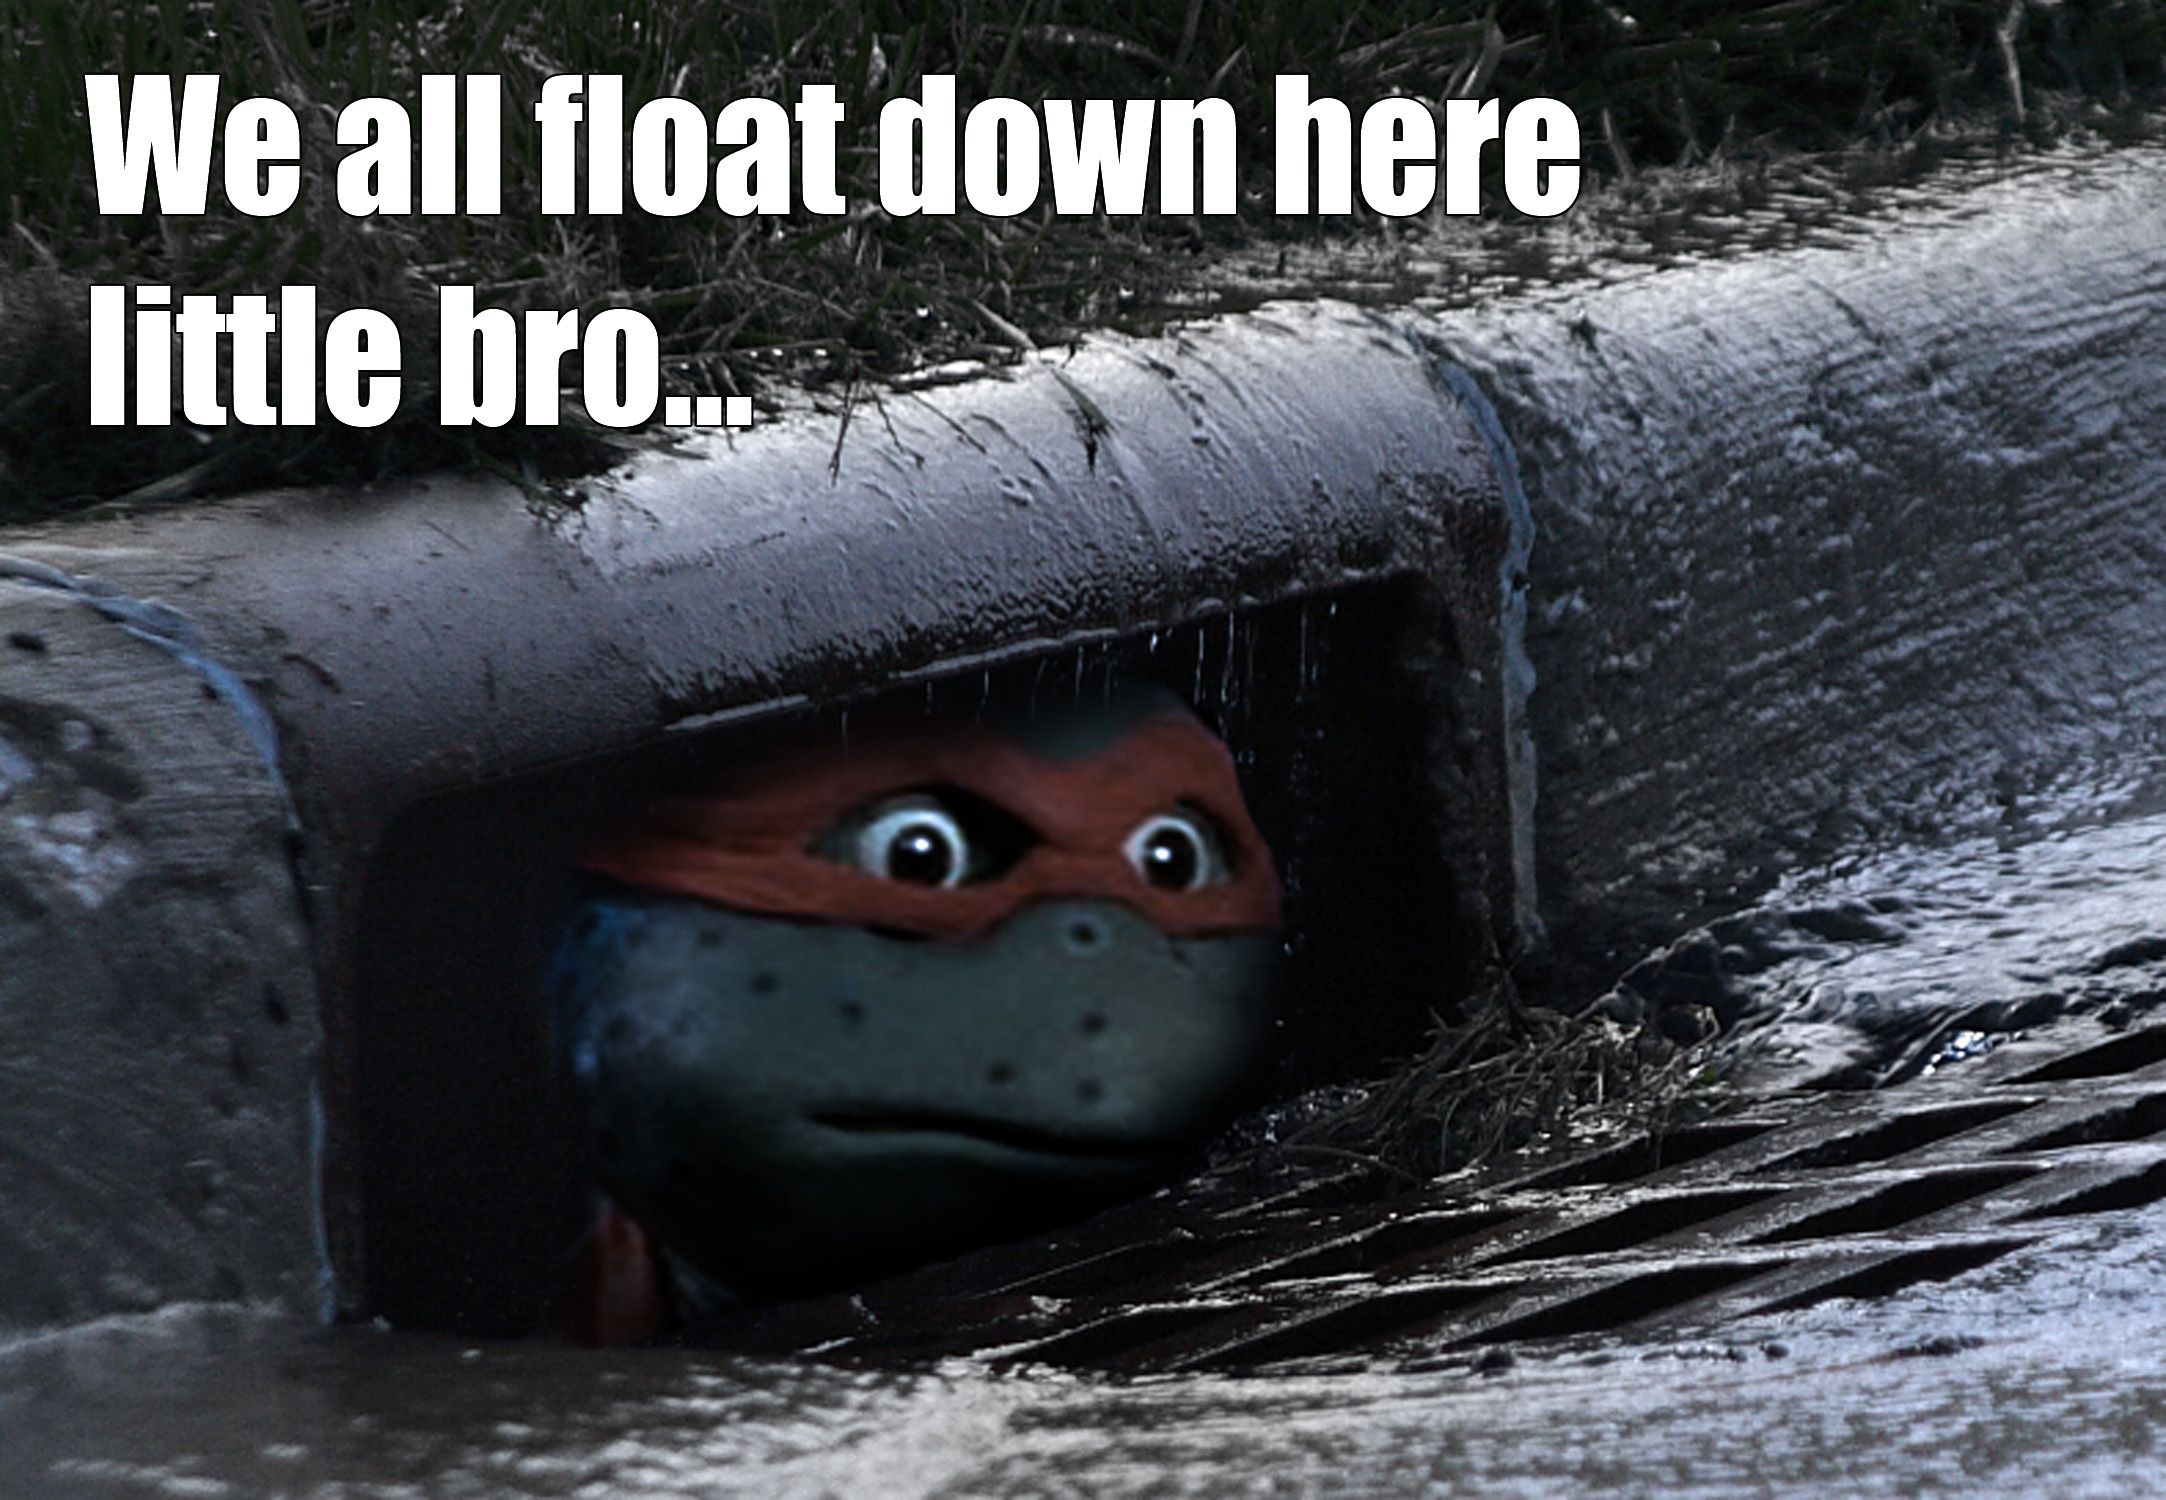 TMNT meme about the sewers